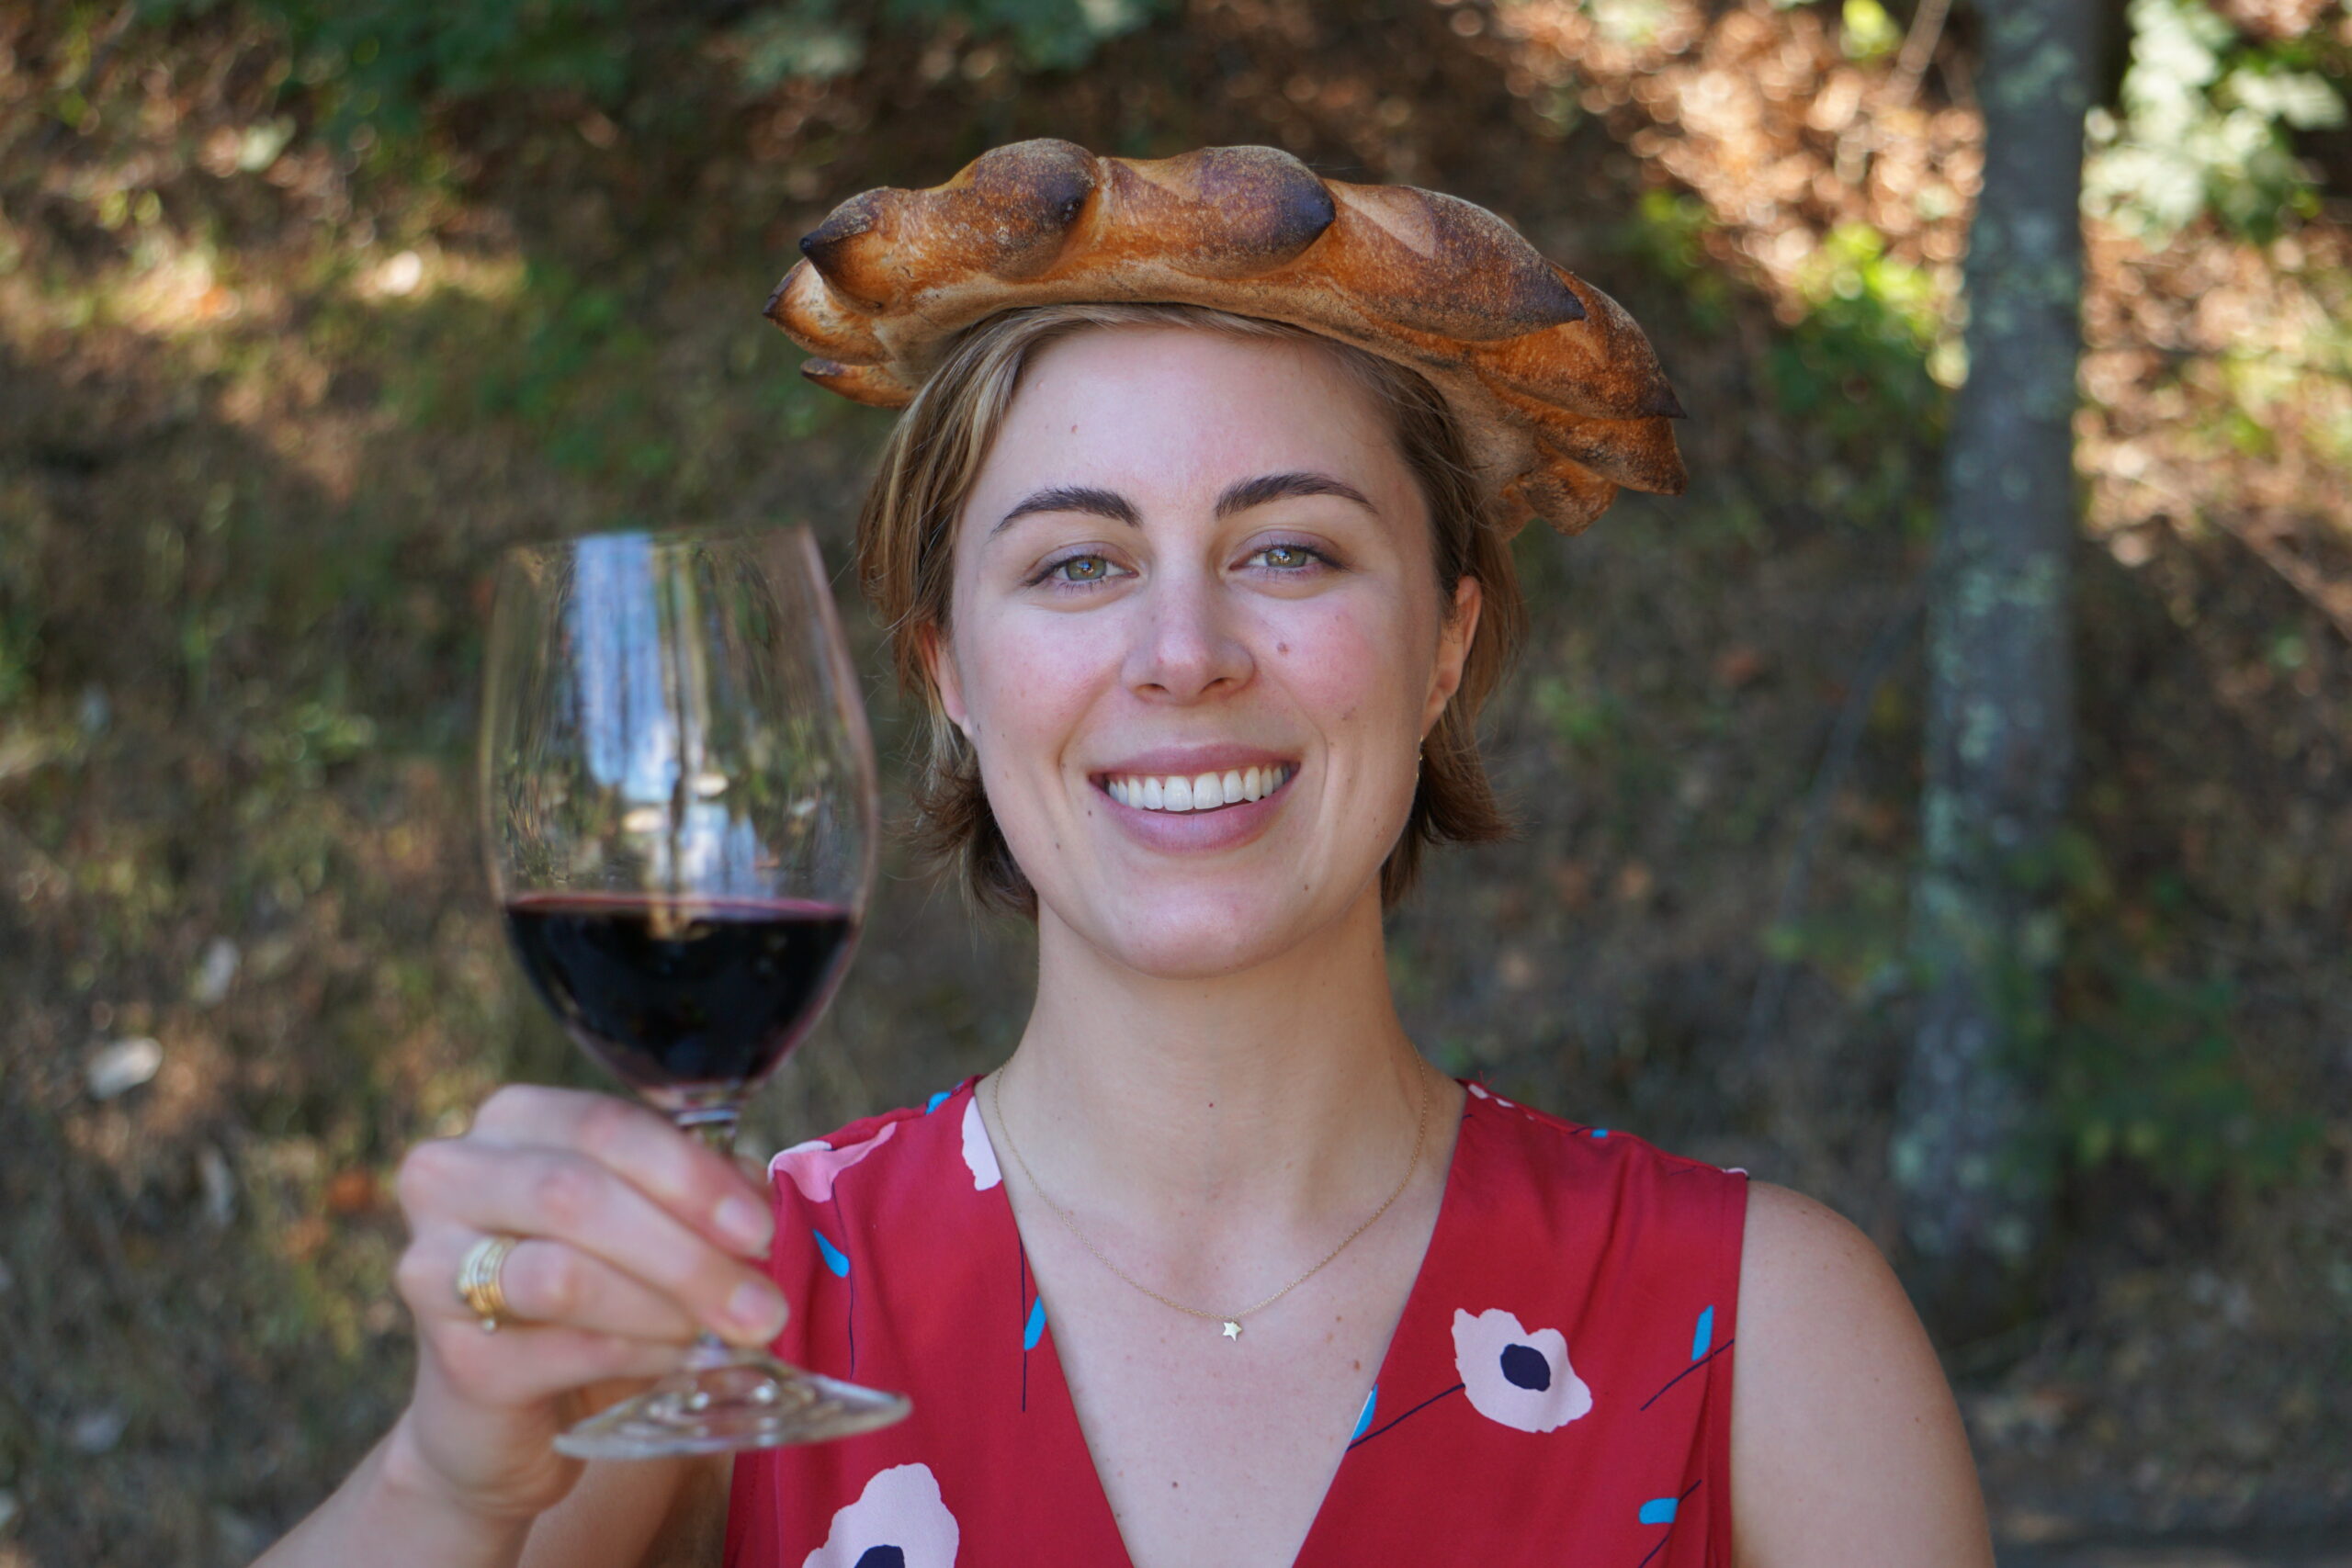 Maddy Keenan daughter of Michael and Jennifer Keenan holding a glass of wine